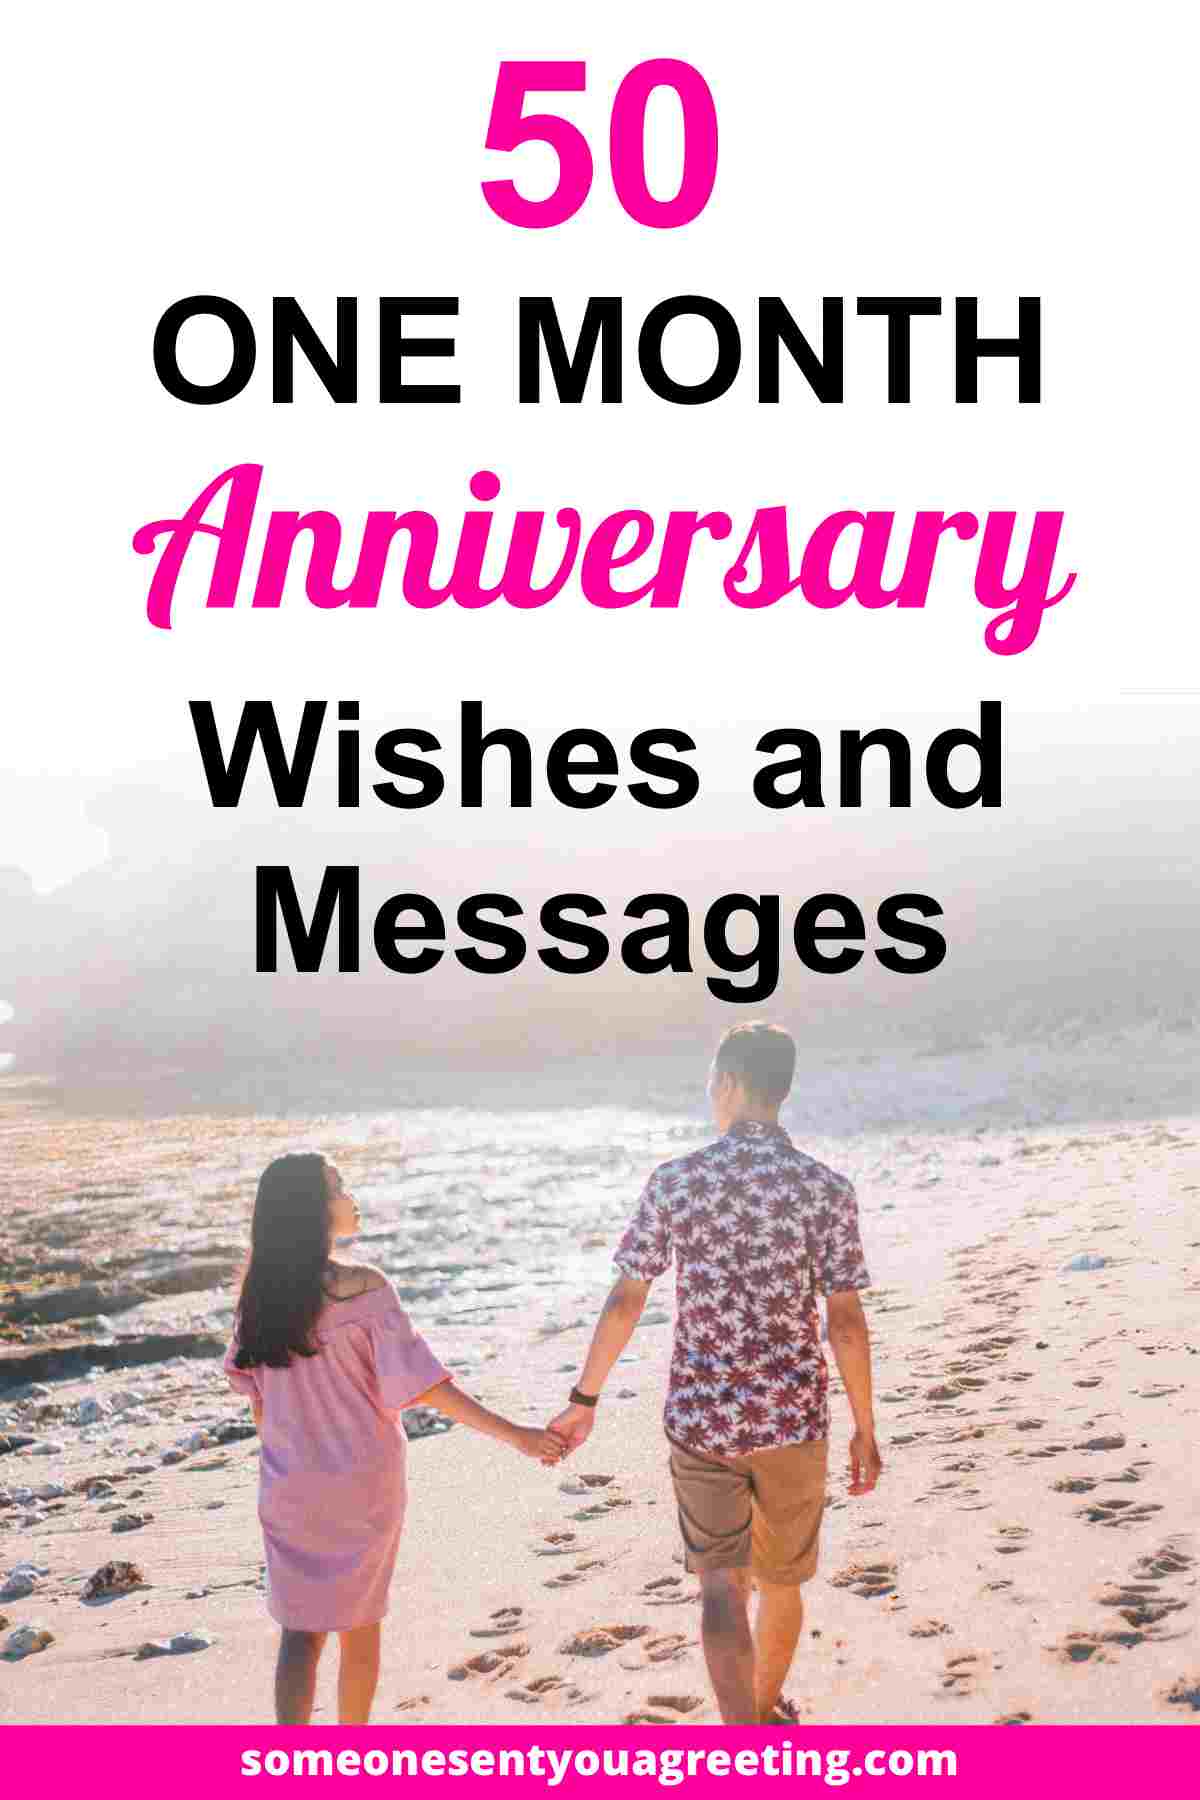 One month anniversary wishes